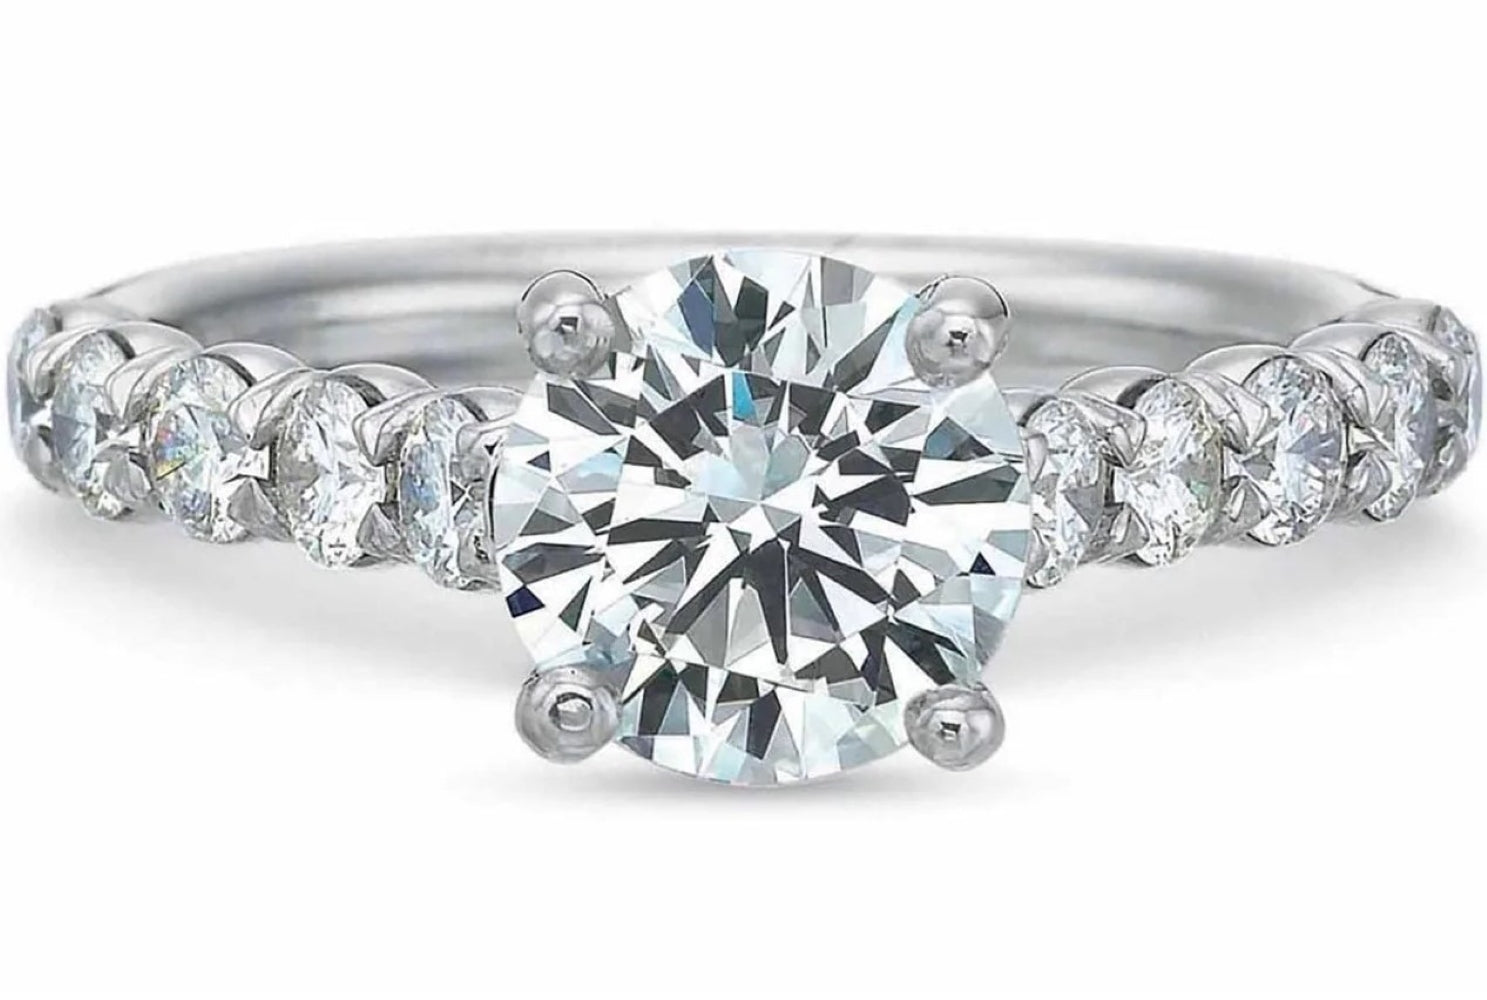 Best Engagement Rings for Wheeling West Virginia - Melina Jewelry